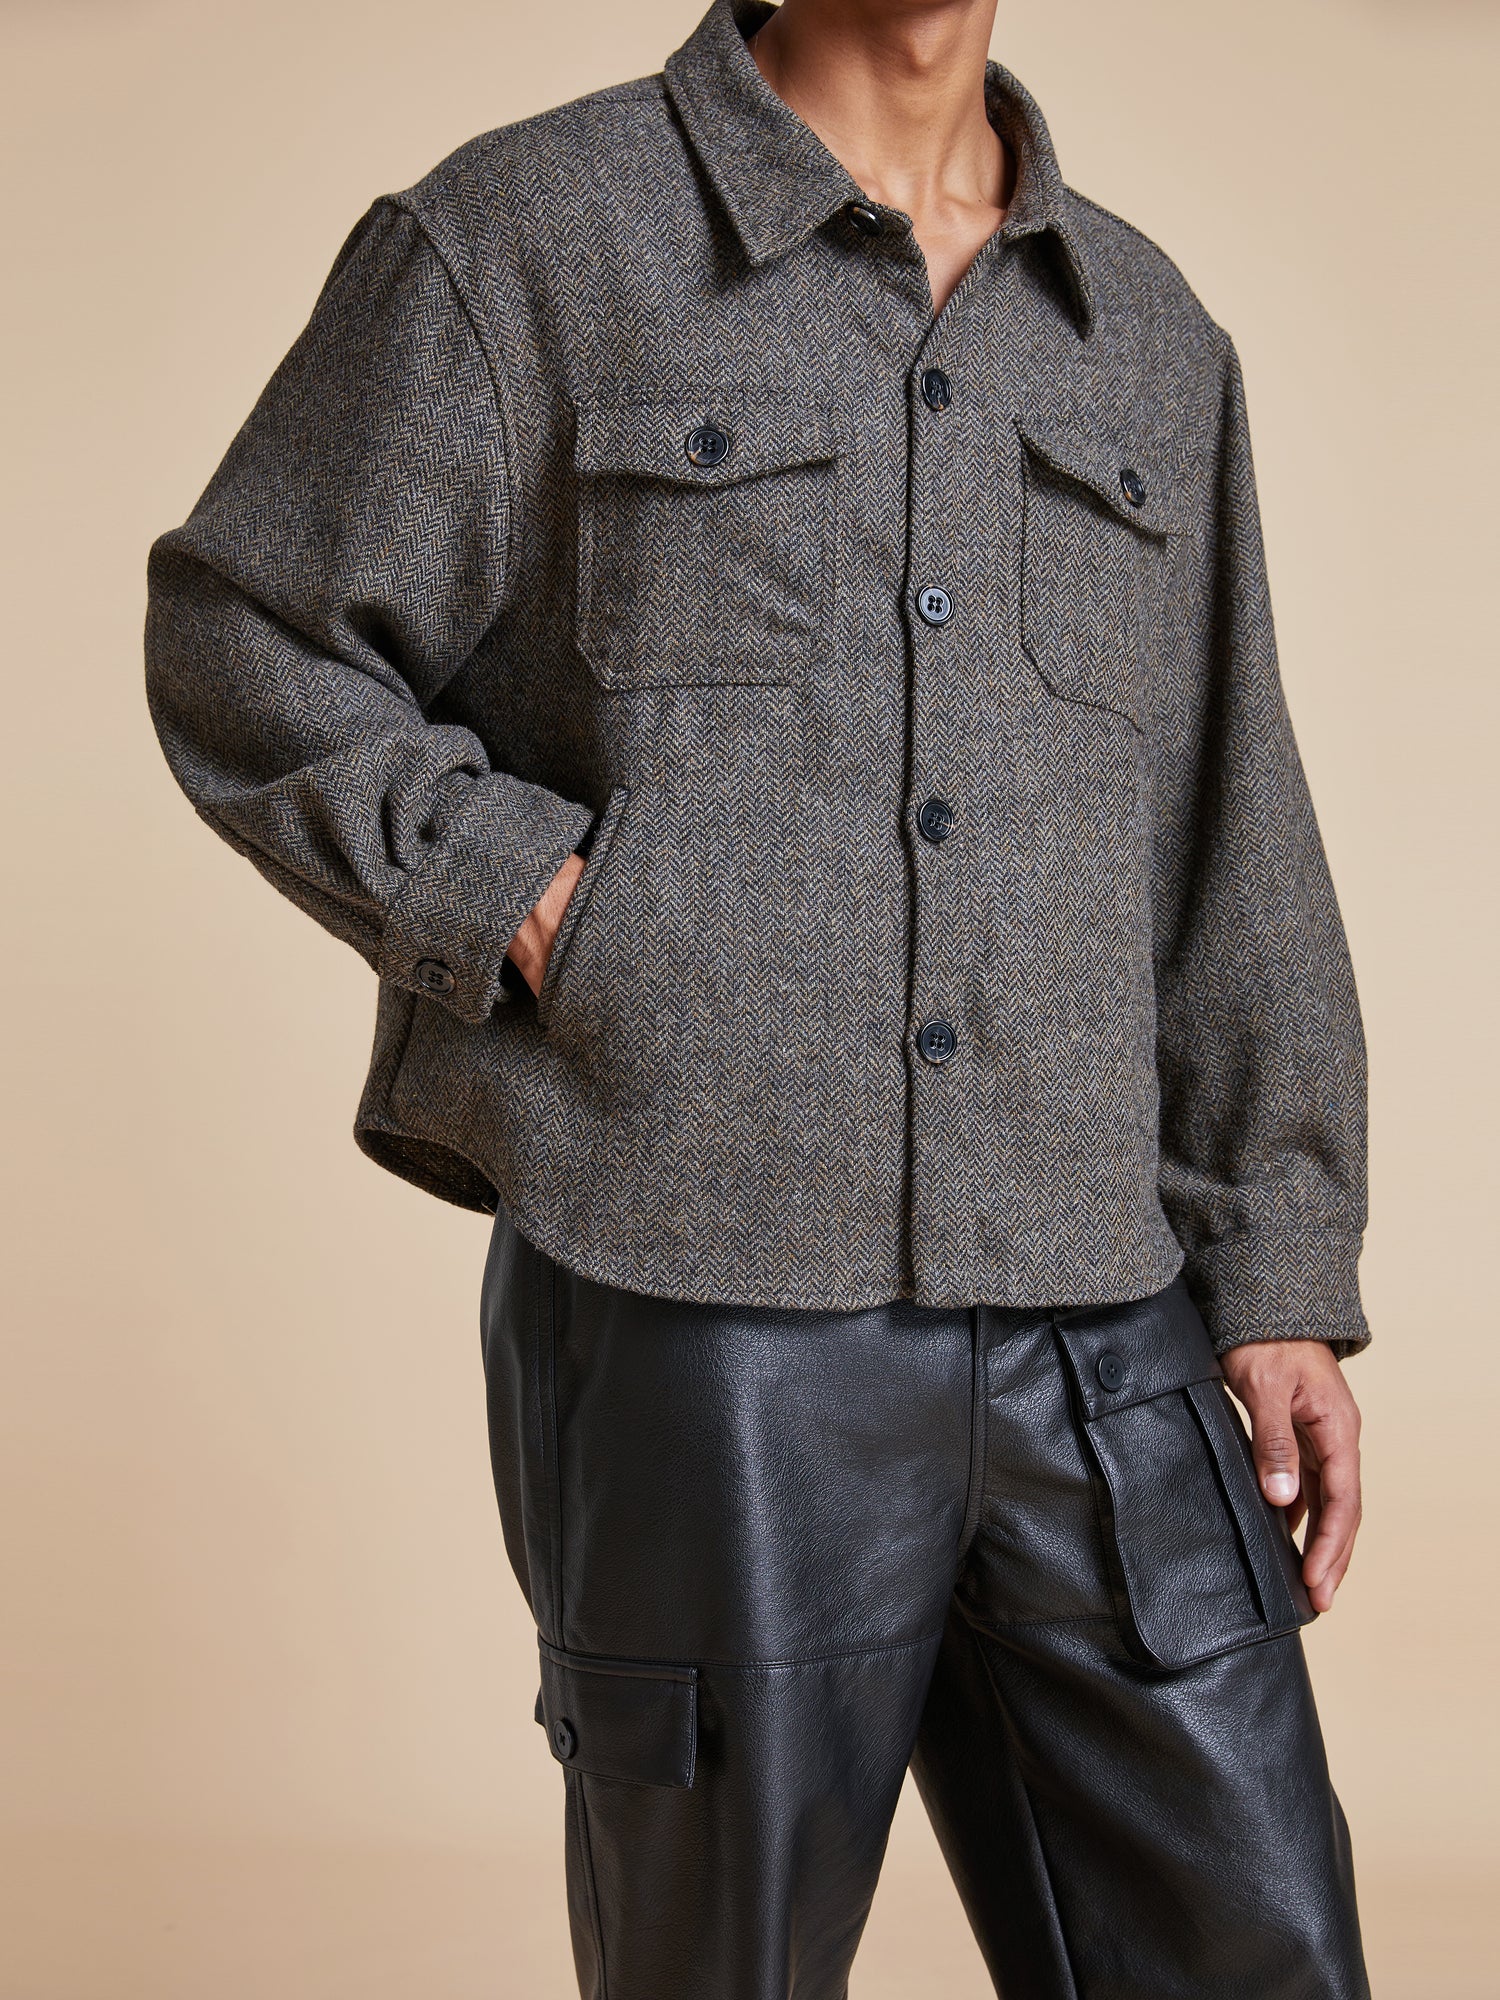 The model is wearing a Found Raven Herringbone Overshirt and leather pants.